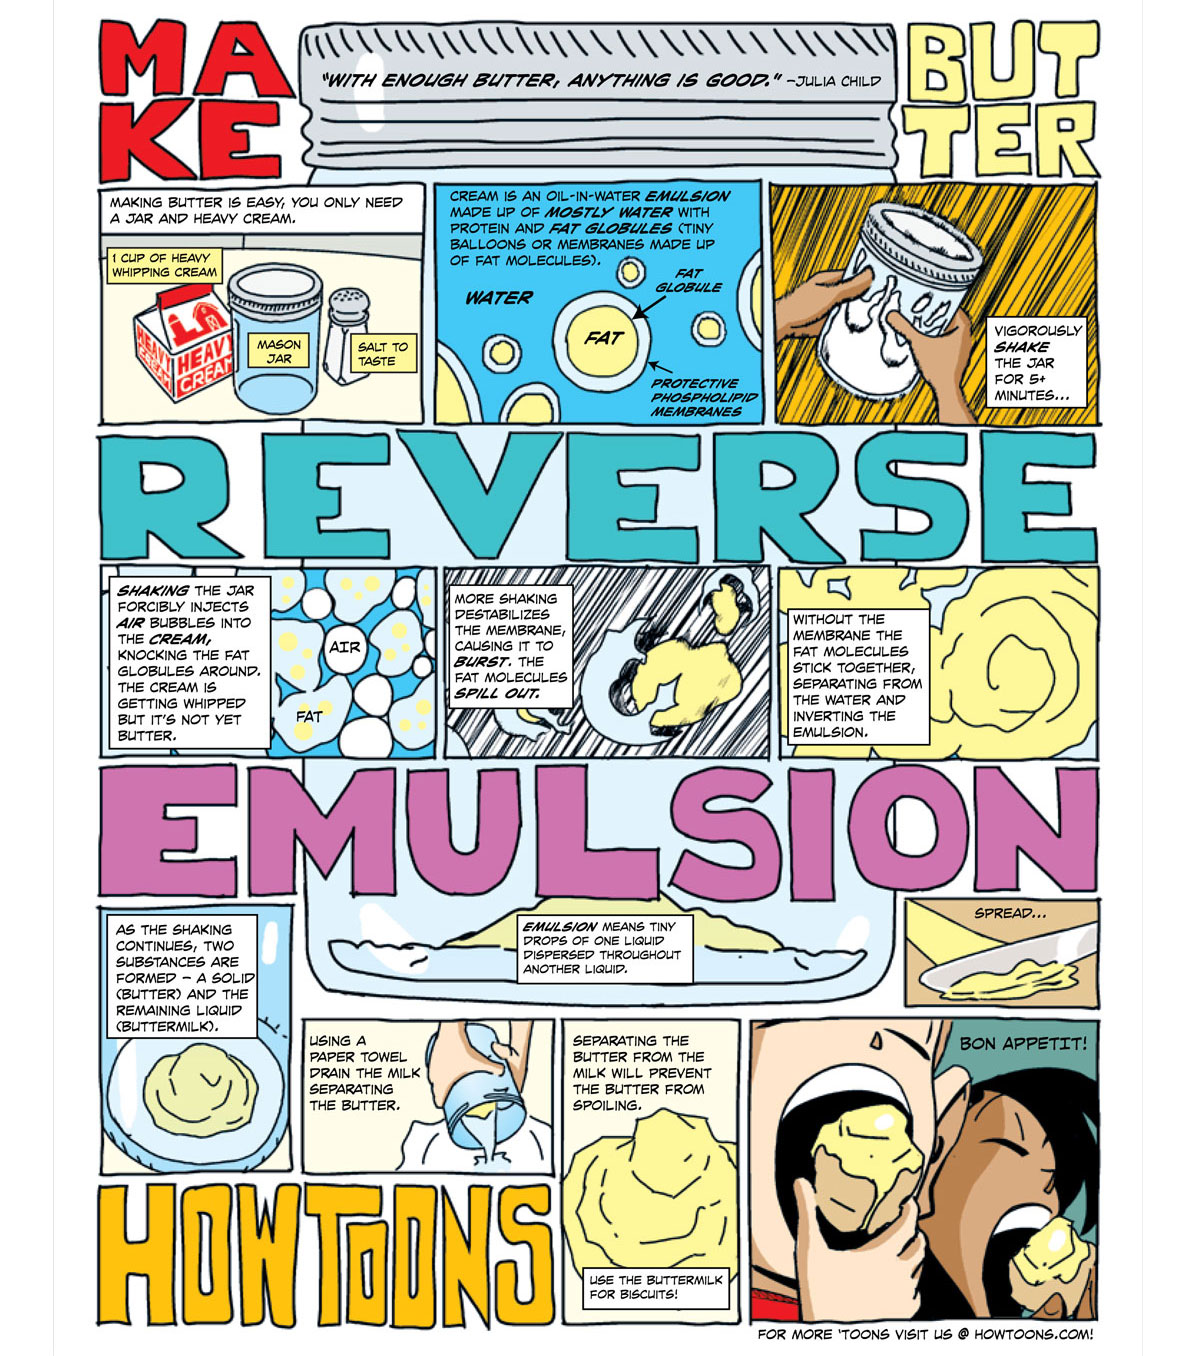 Howtoons: Make Butter with Reverse Emulsion